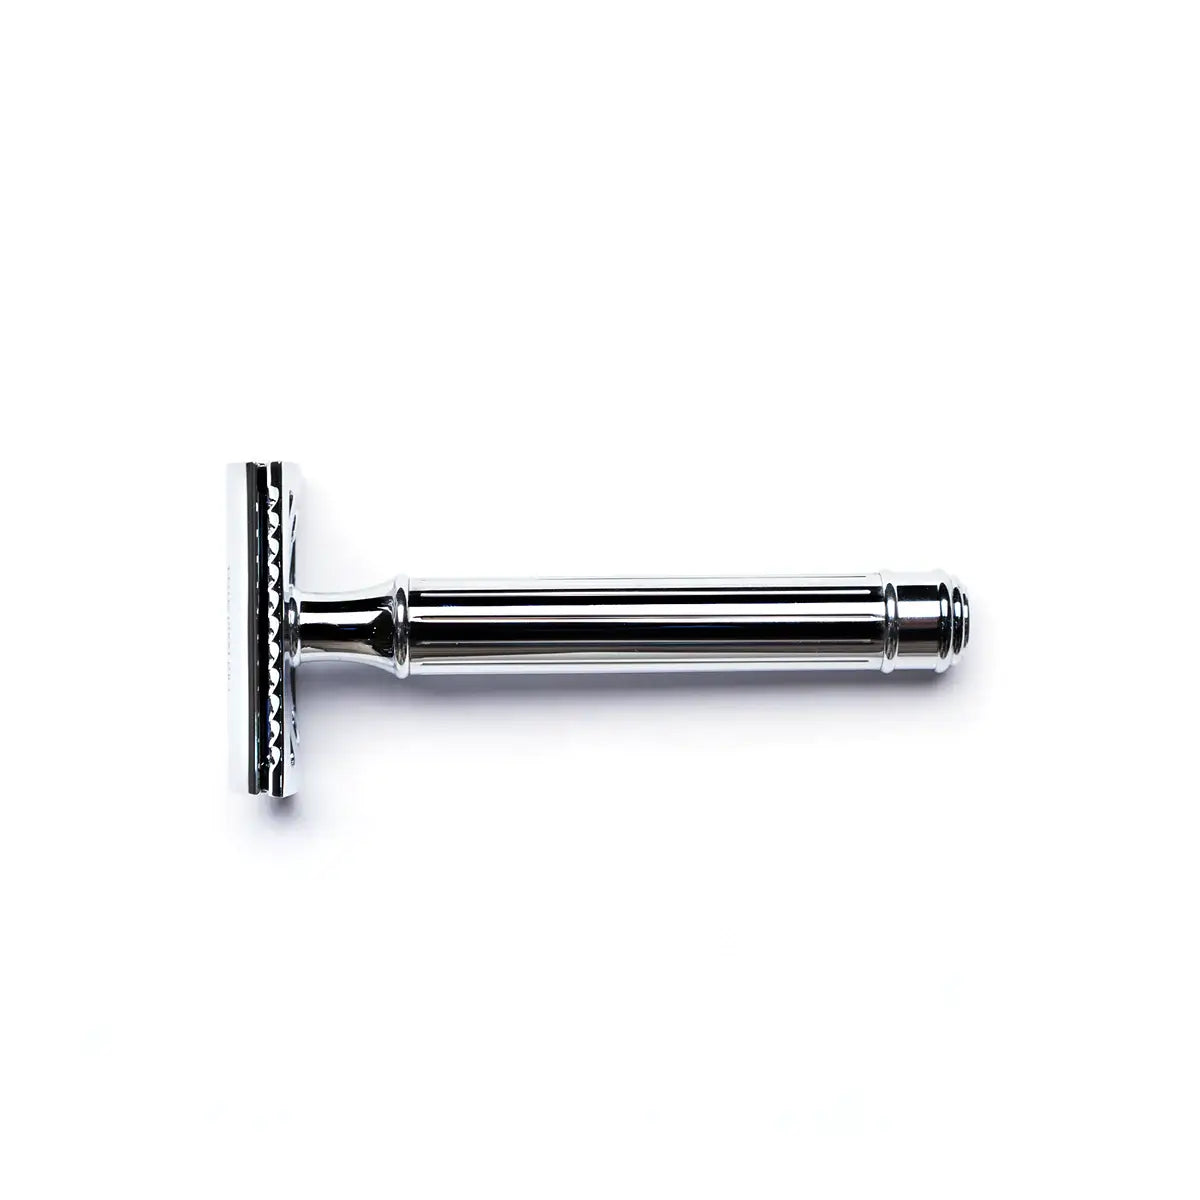 Taylor of Old Bond Street No 89 Chrome Safety Razor entry-level model (recommended for general beards)